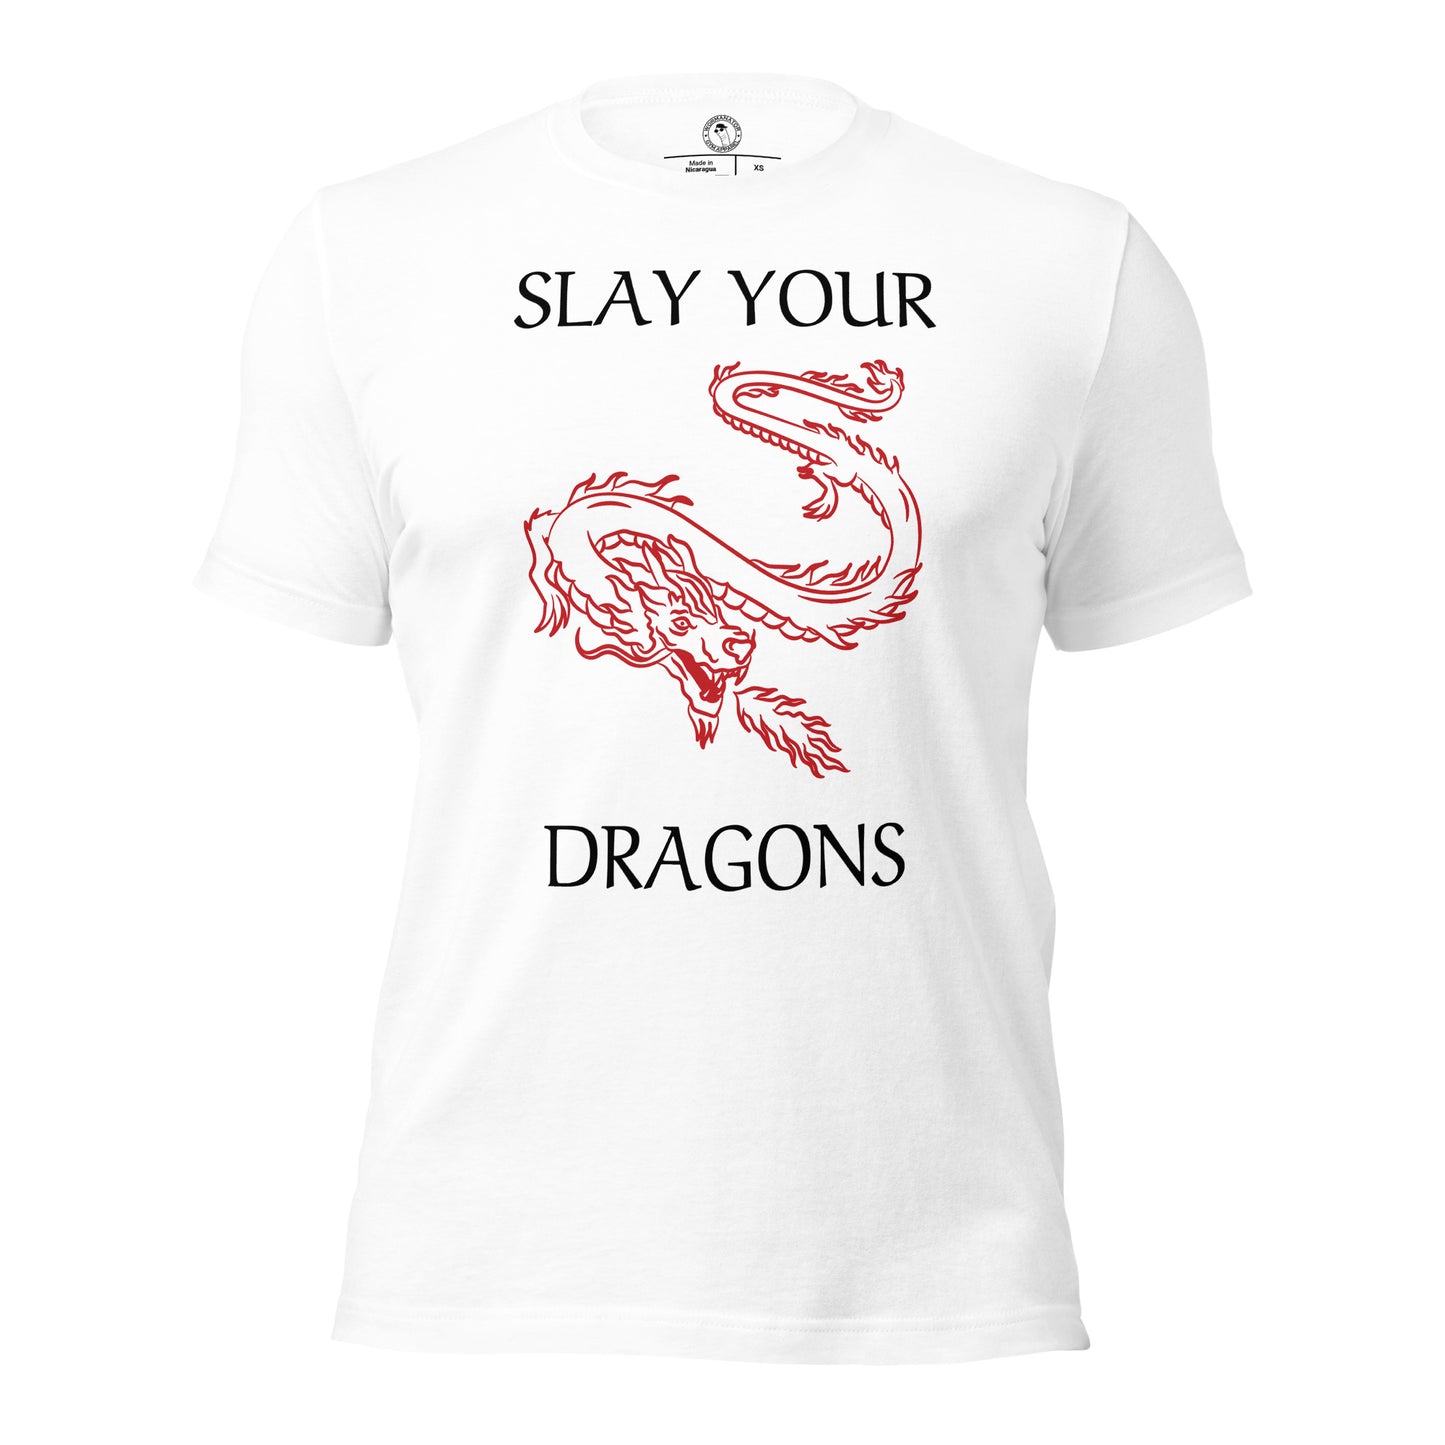 Slay Your Dragons Shirt in White